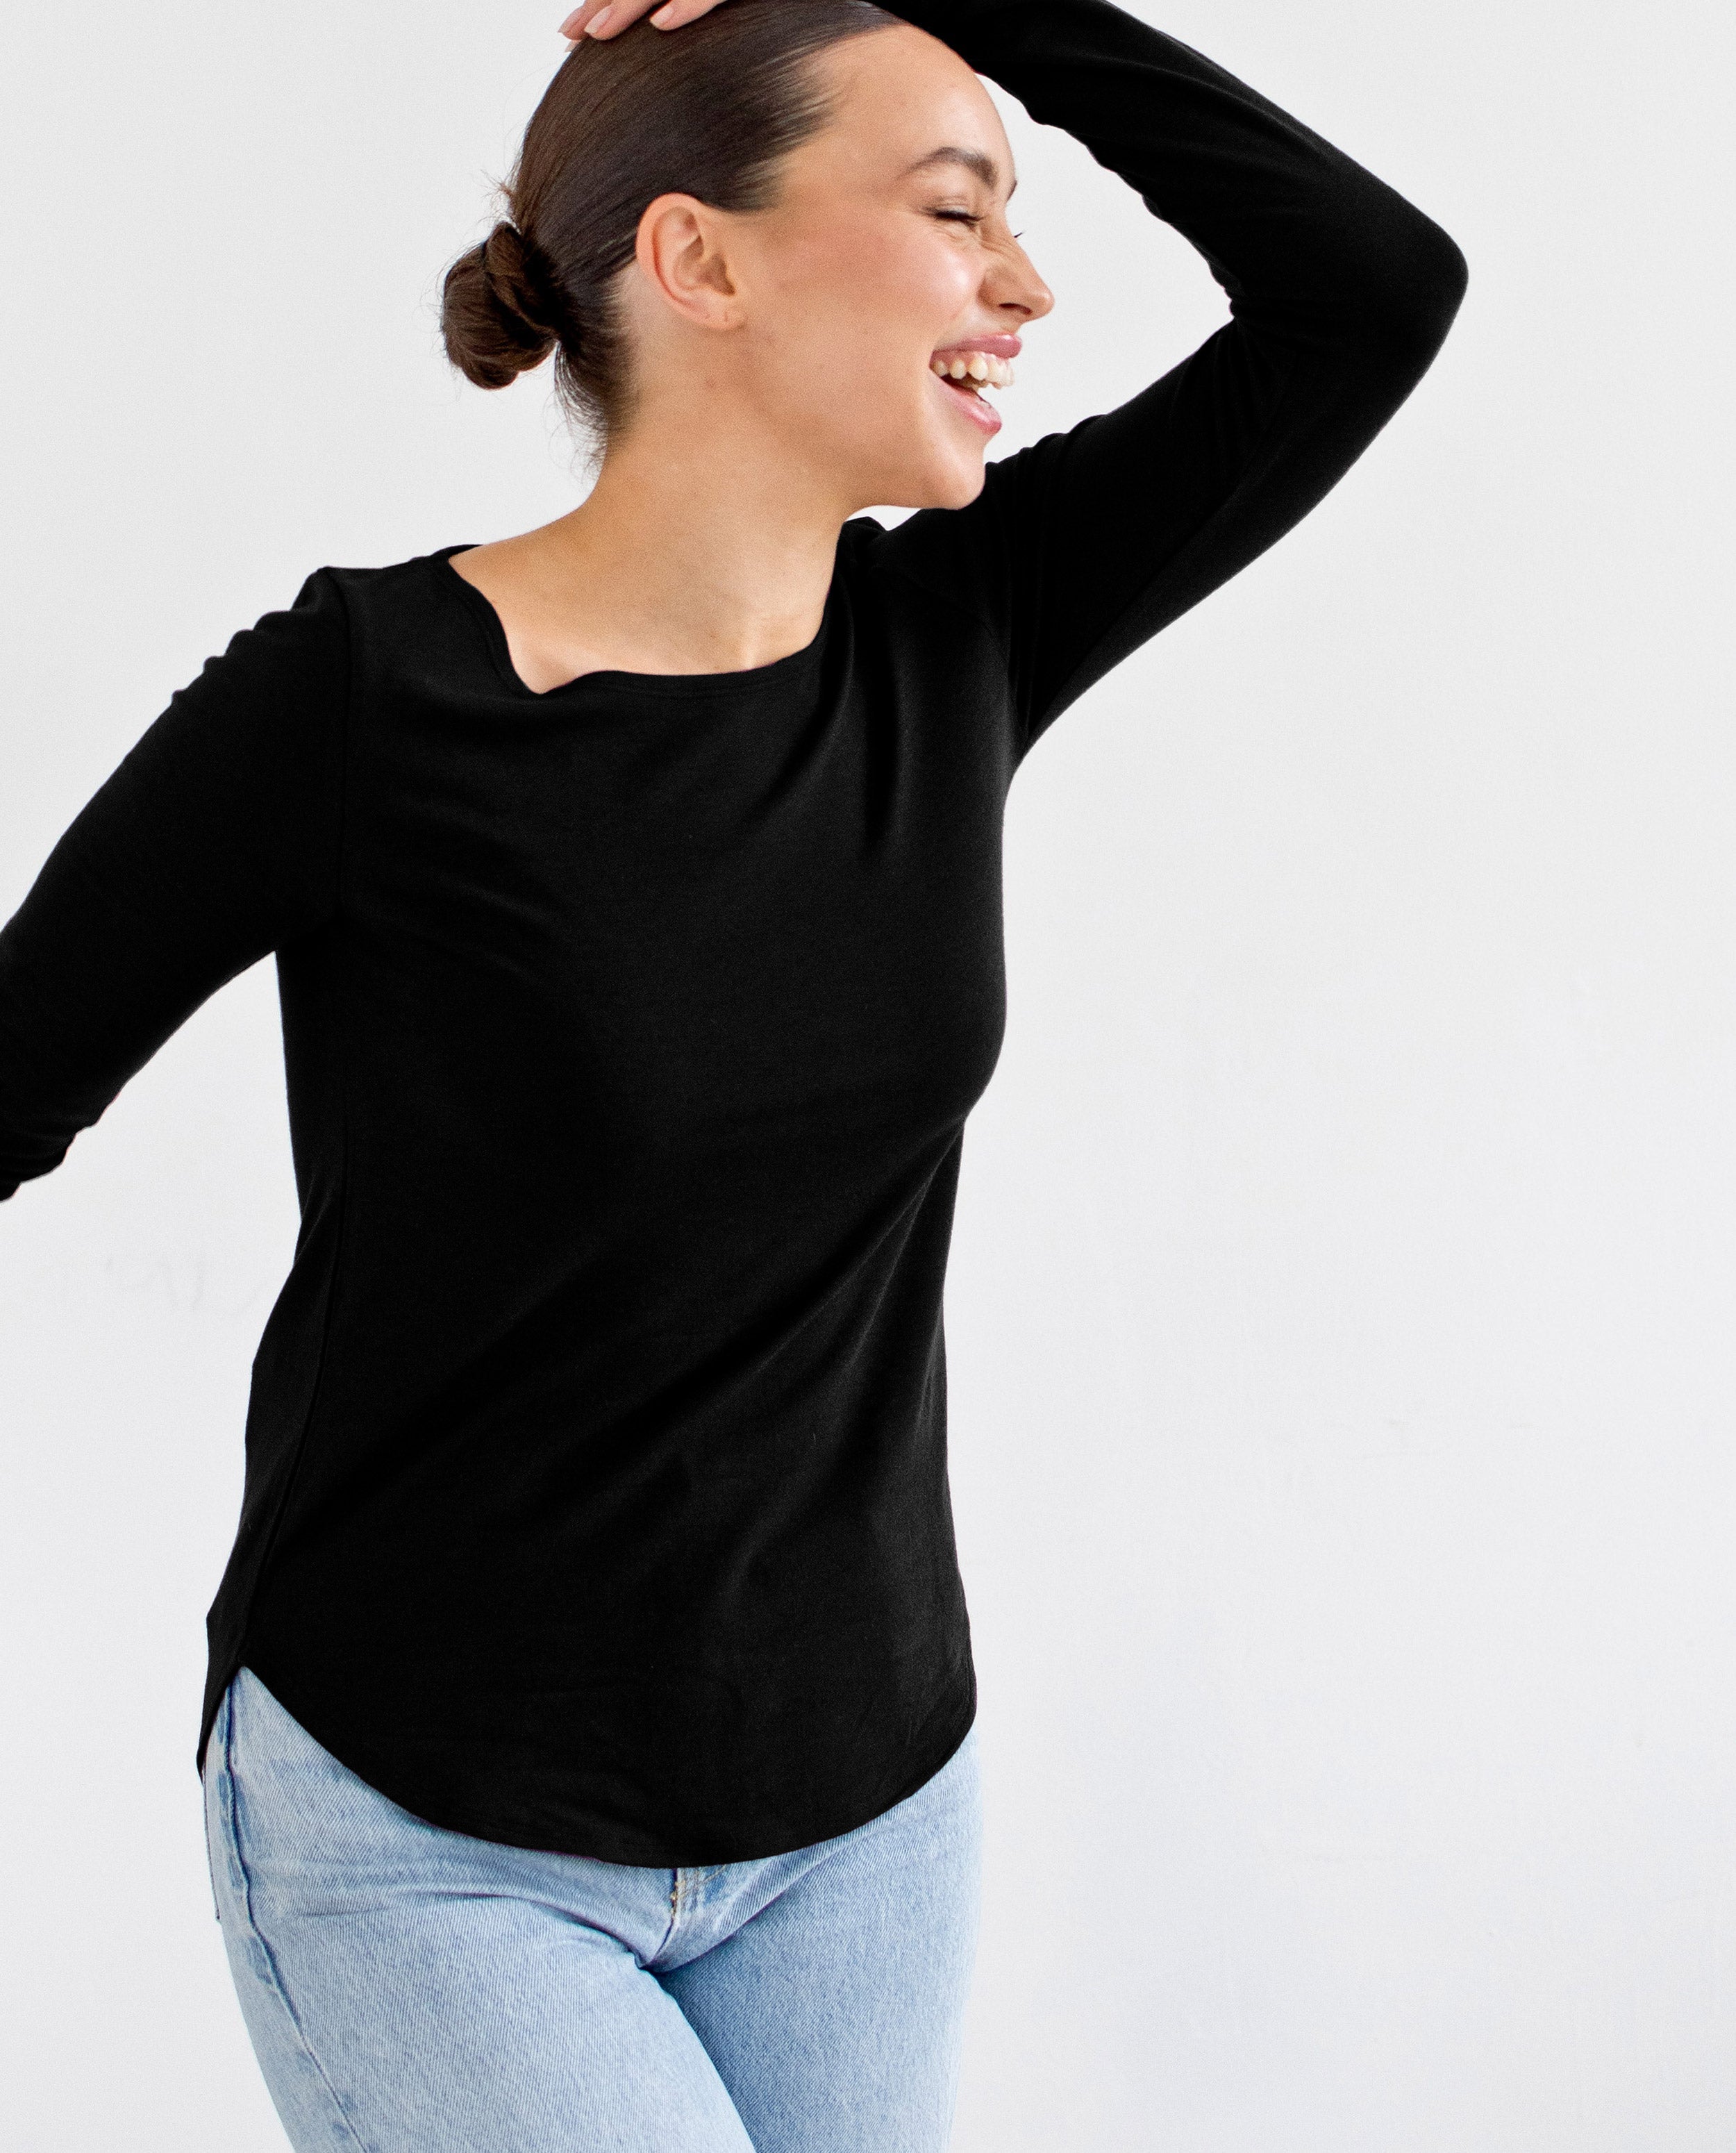 The Boatneck Top | FRANC Sustainable Clothing